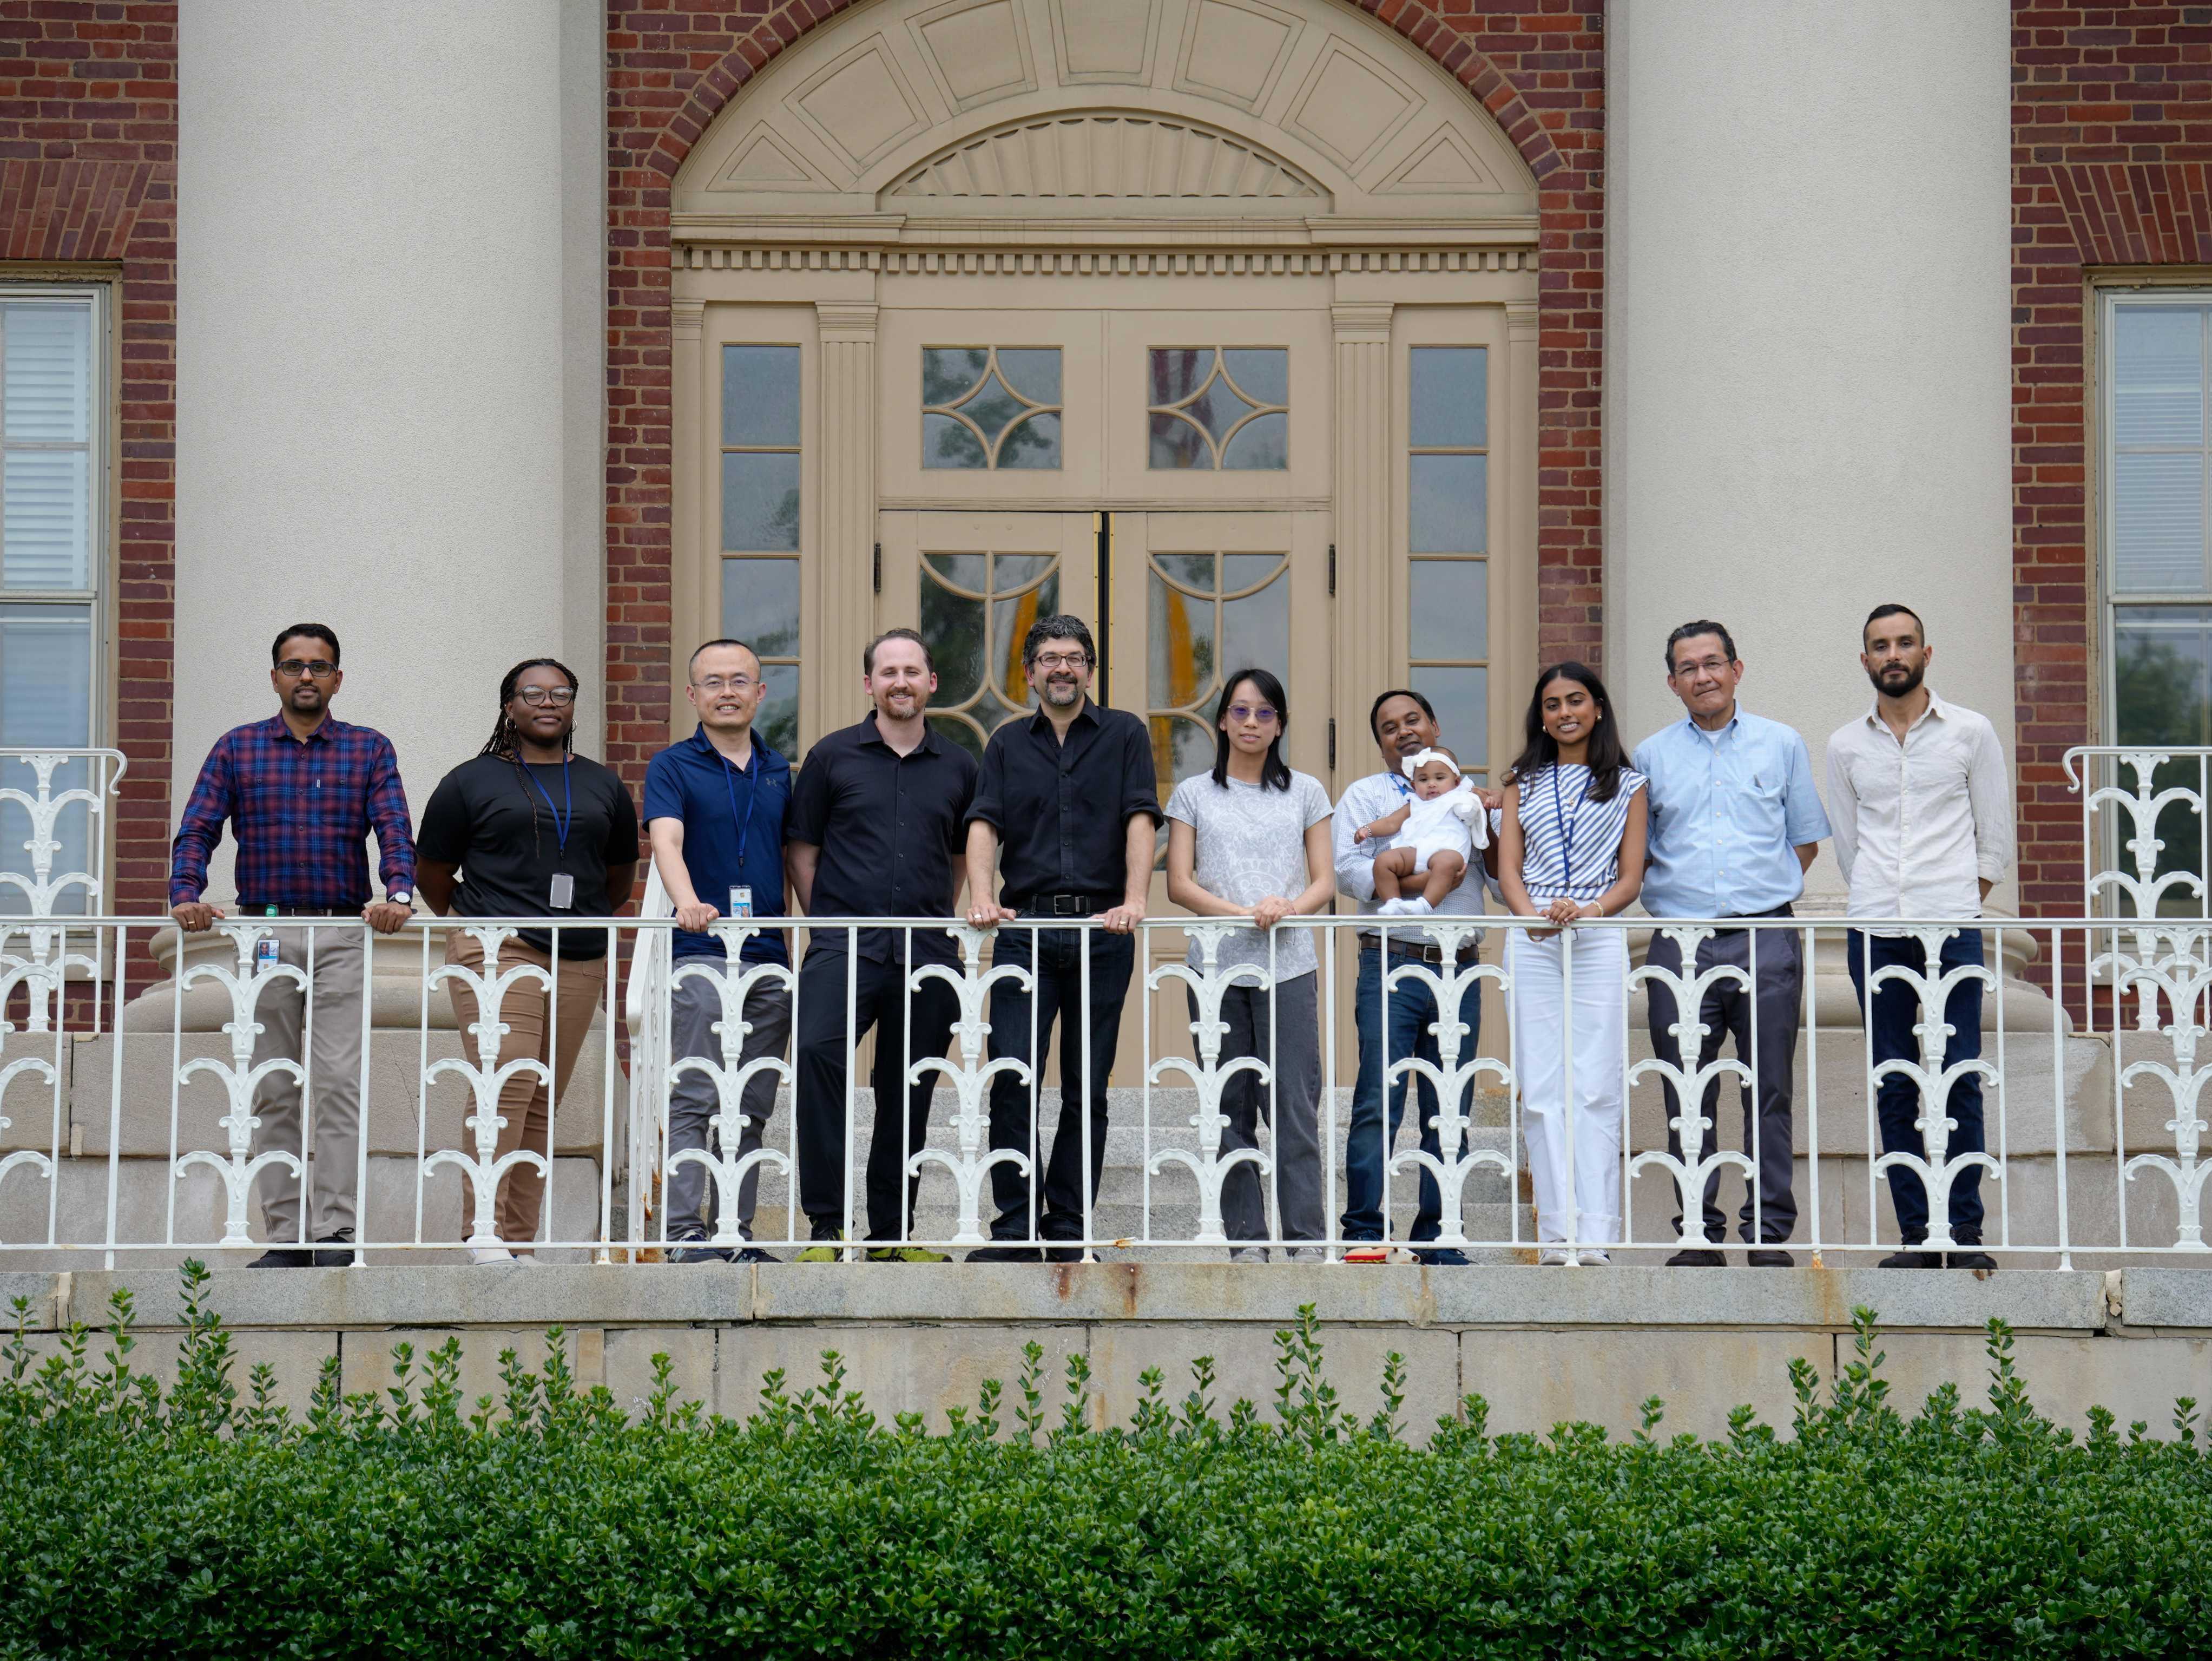 Members of the NIDDK immunoregulation section standing on a balcony and smiling.